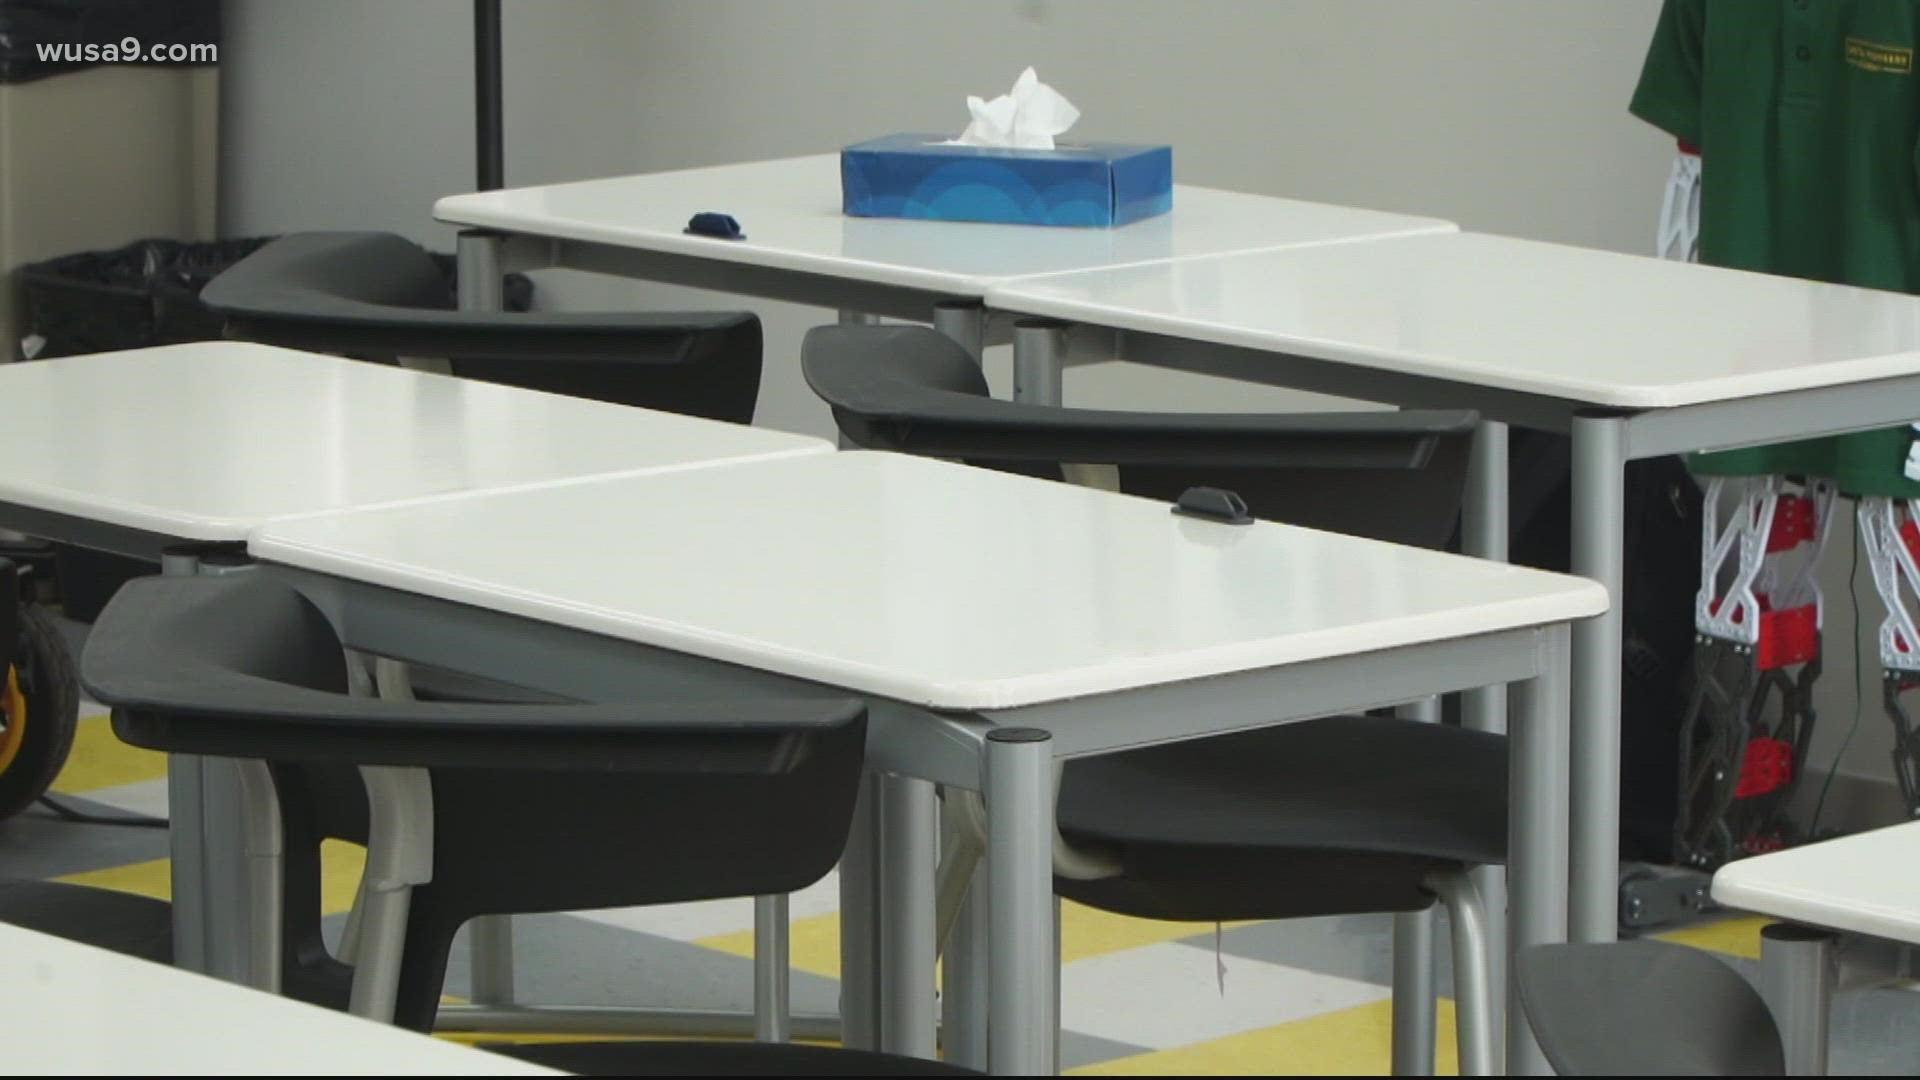 In Southeast D.C., one charter school has had nearly a half-million dollars worth of renovations in an attempt to keep their students safe.